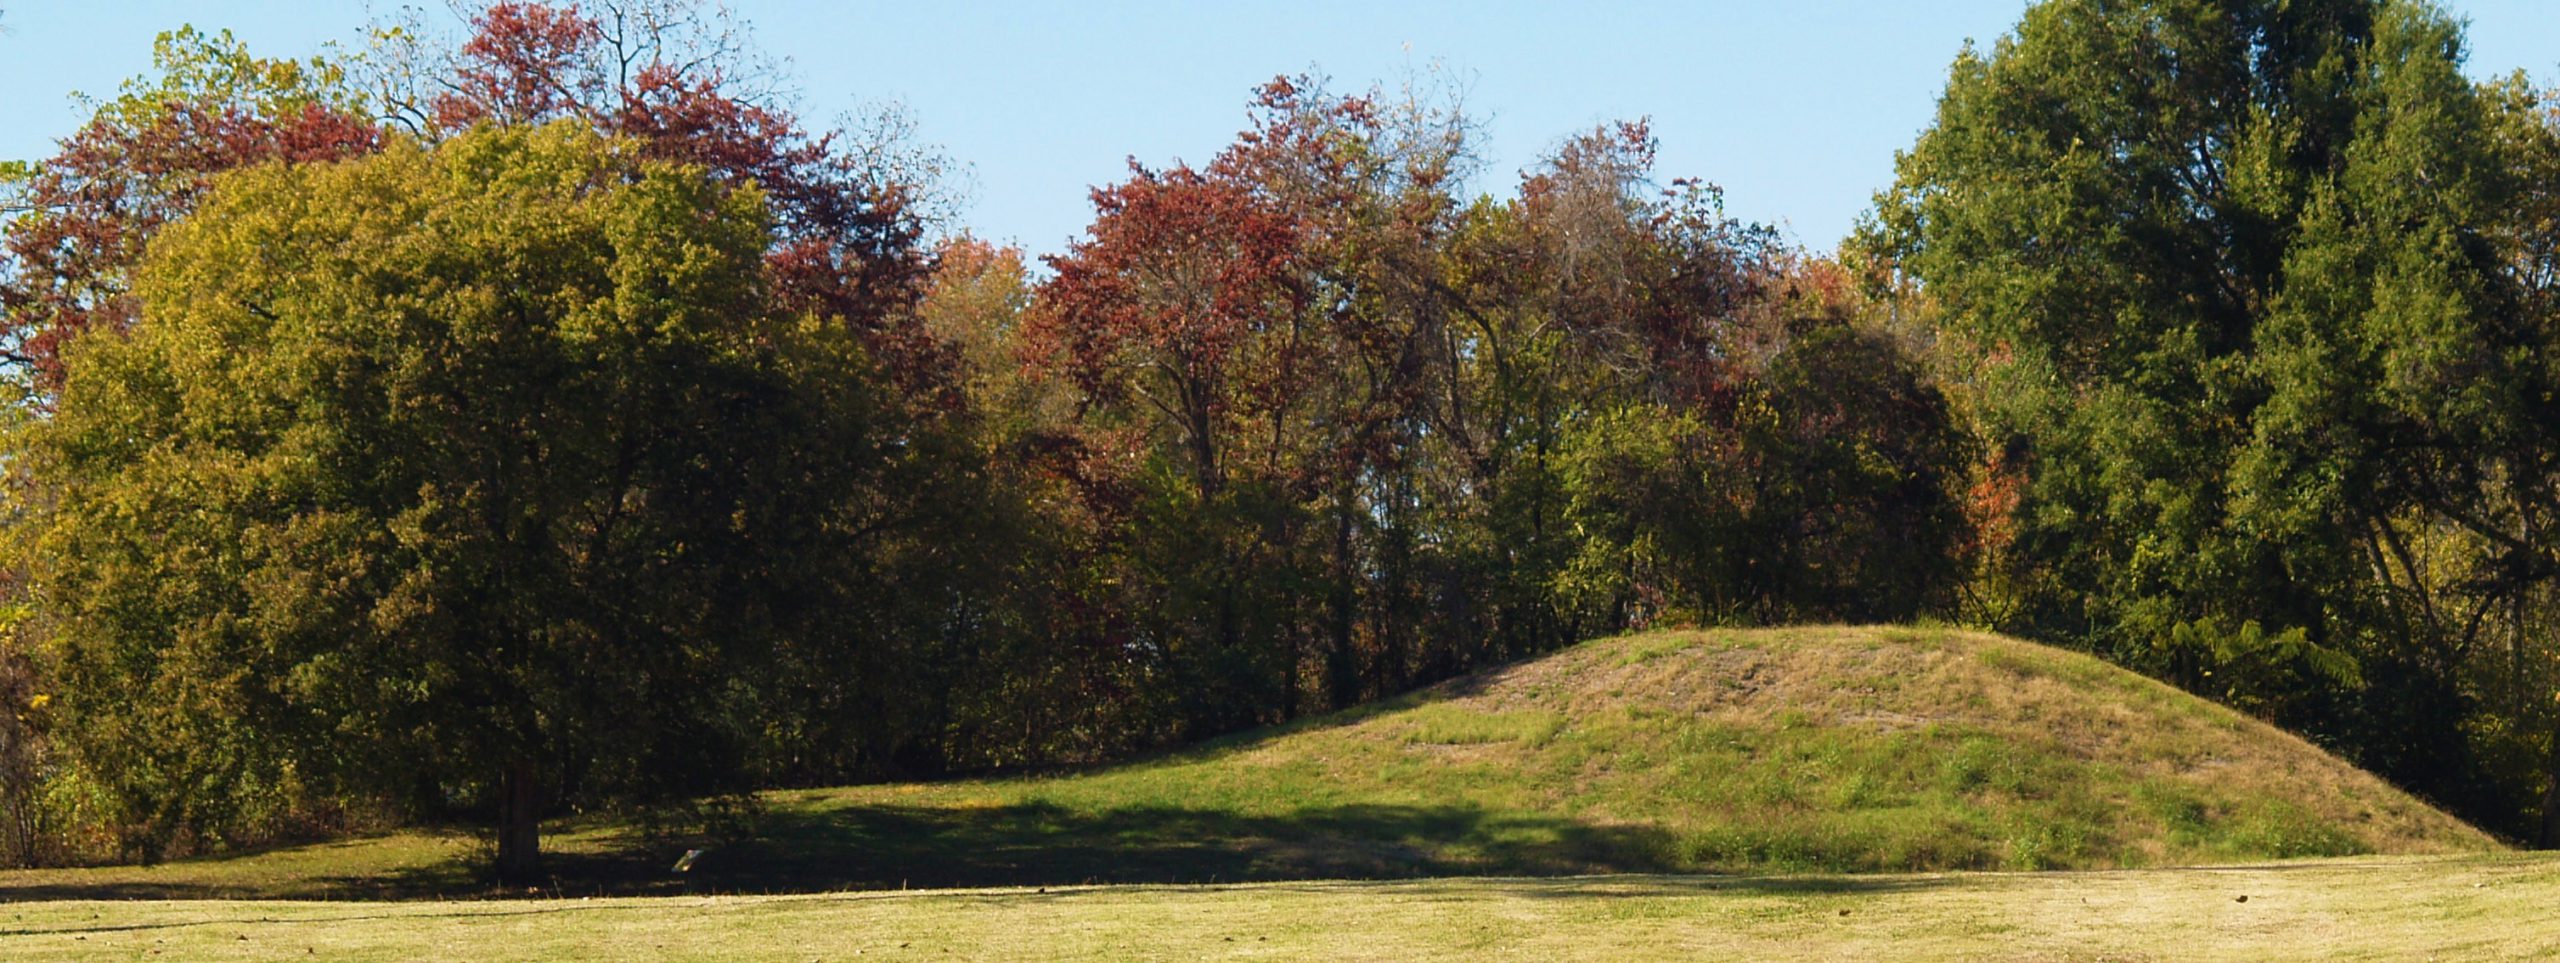 Large earthen mound with trees behind